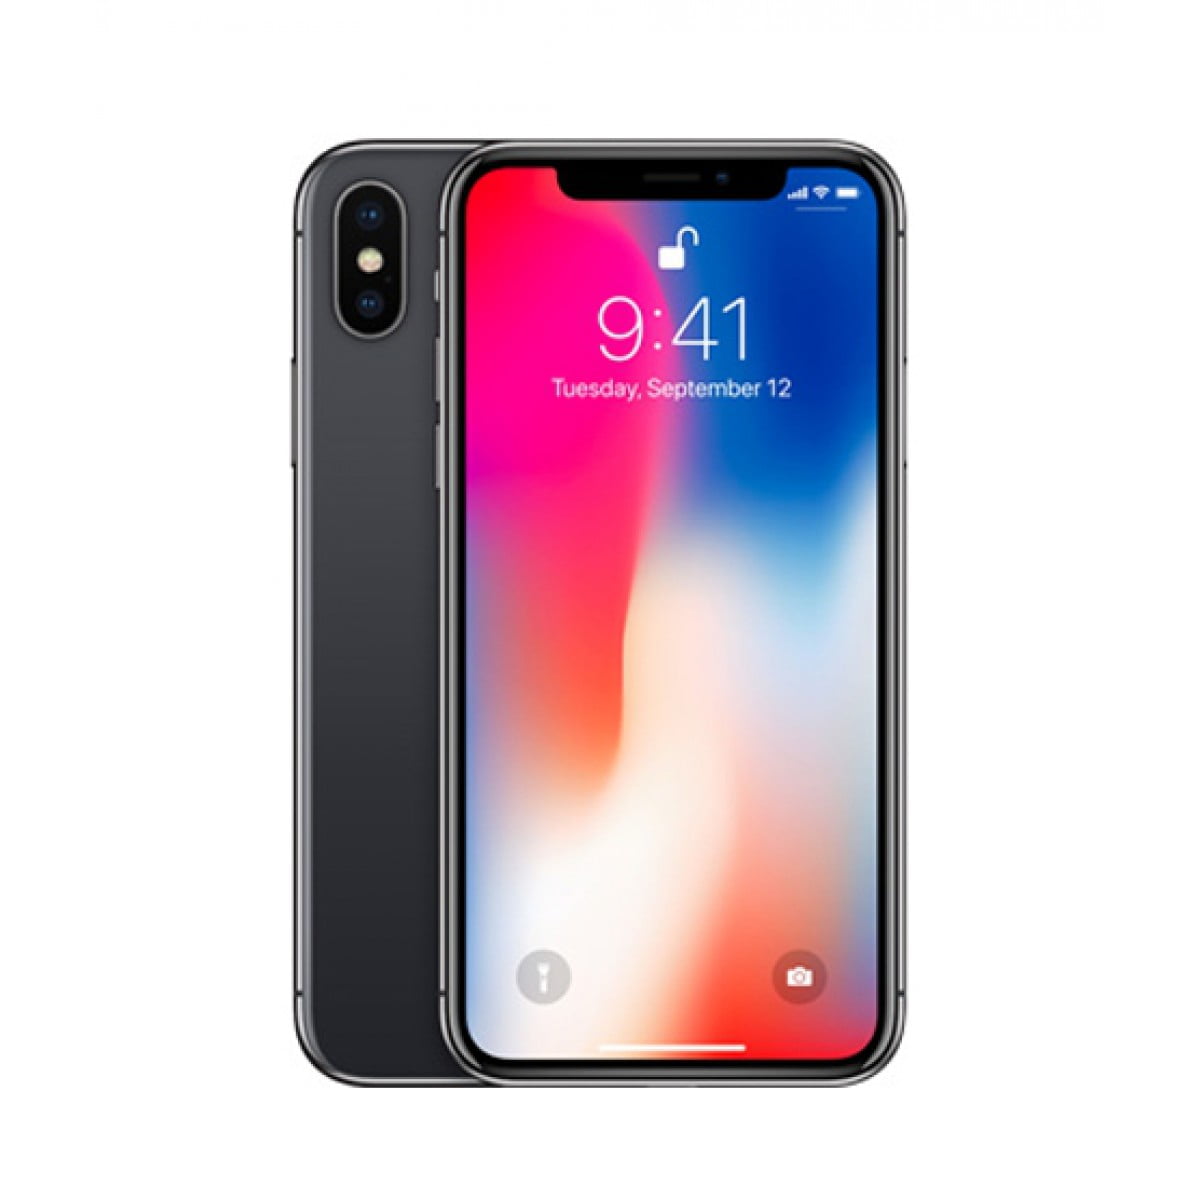 Restored Apple iPhone X 256GB, Space Gray - Locked T-Mobile 